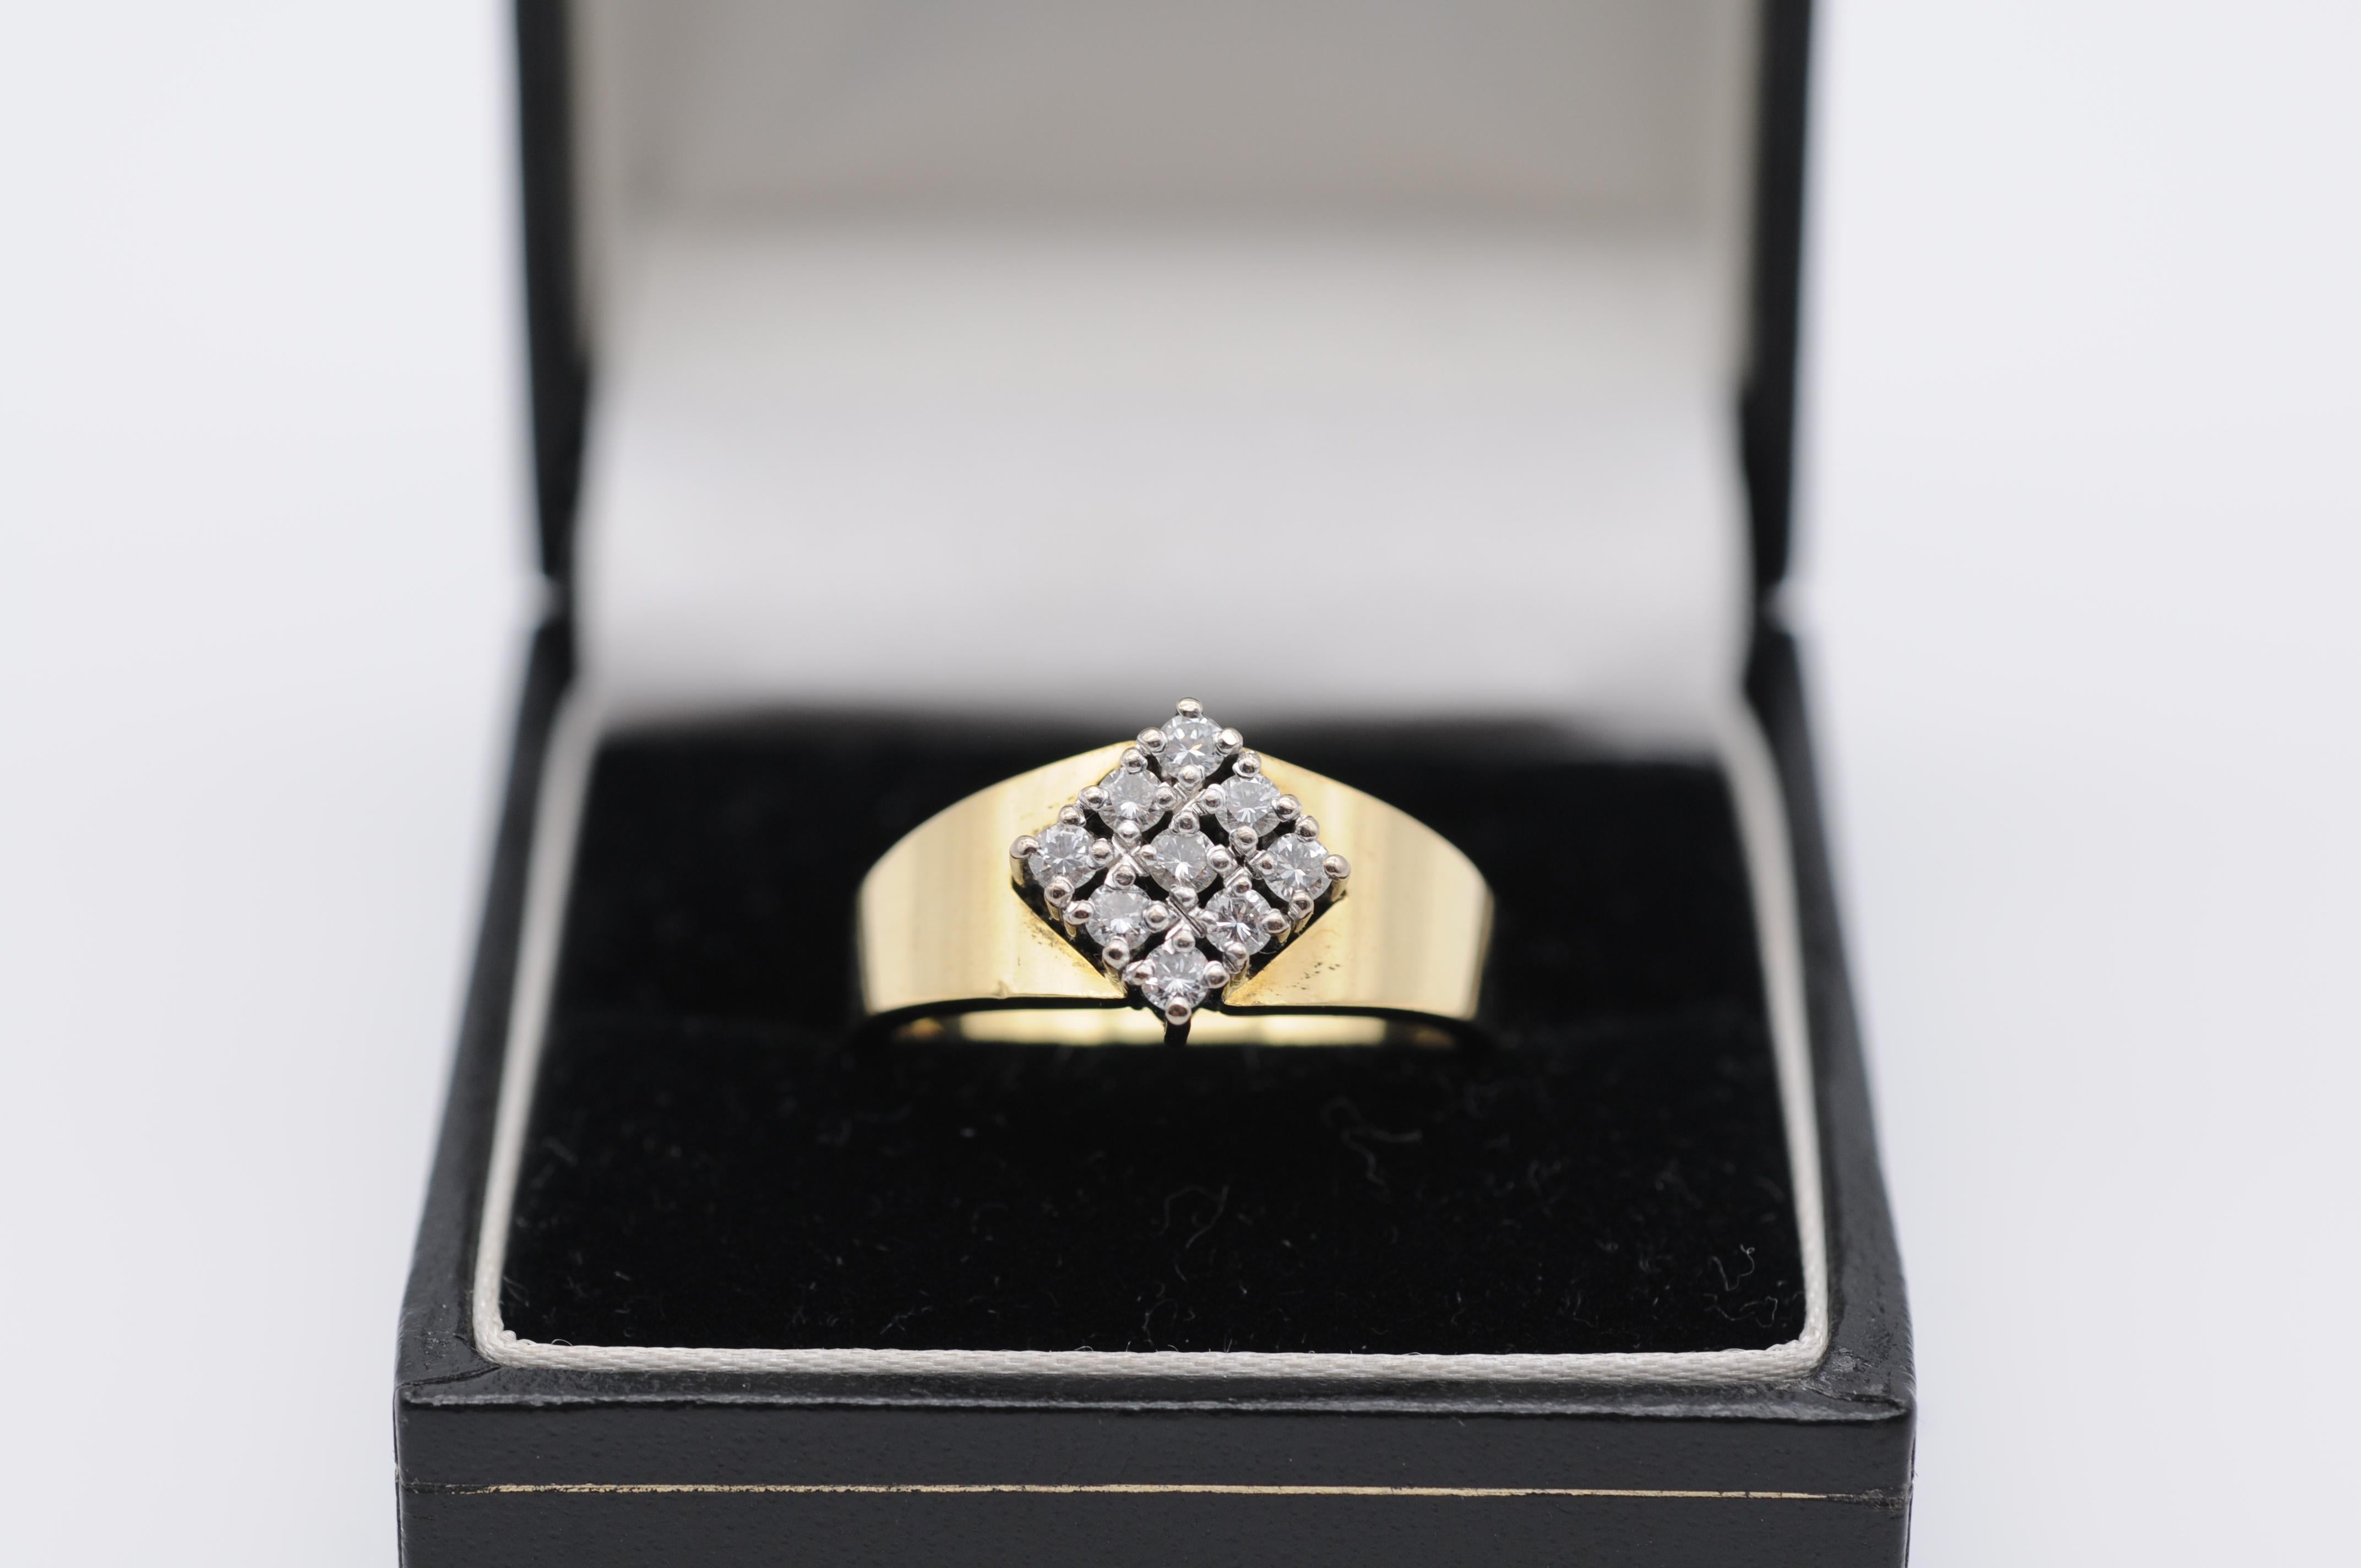 This stunning diamond ring is a true symbol of elegance and sophistication. Crafted from 18K yellow gold, this ring features a beautifully cut diamond in the shape of a diamond, set in a prong setting. The diamond's brilliance is accentuated by the